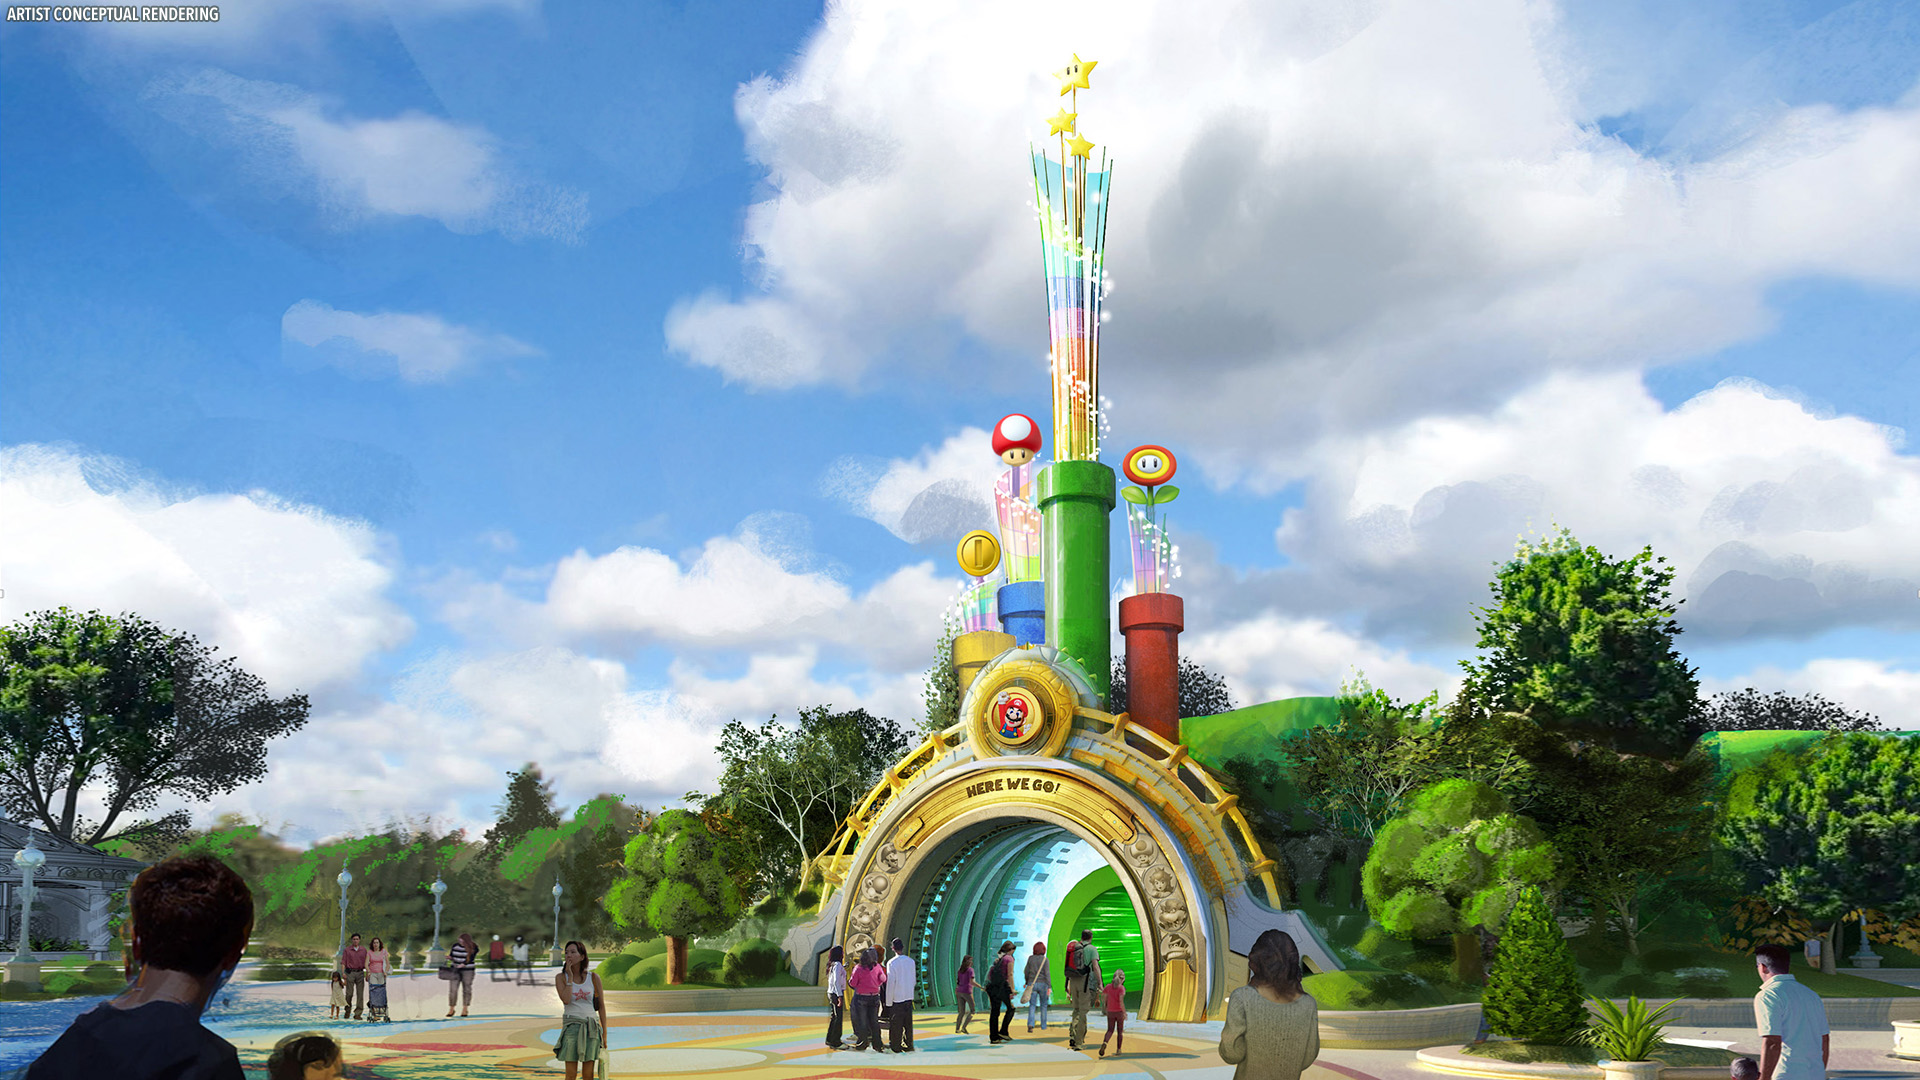 Universal has shown the first images of Super Nintendo World Orlando VGC